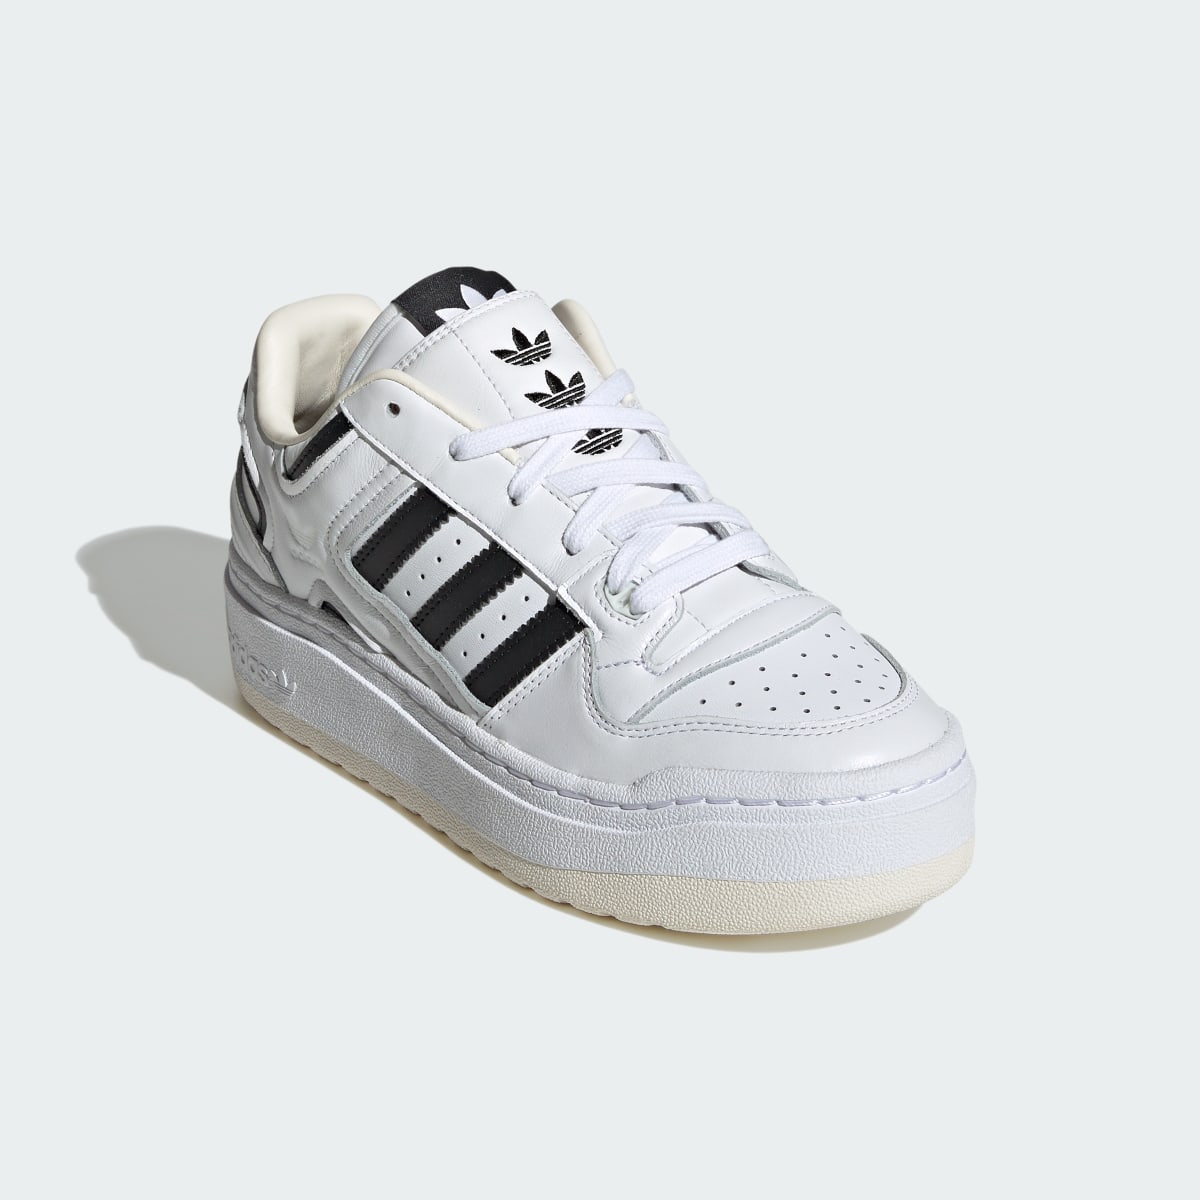 Adidas Chaussure Forum XLG. 5